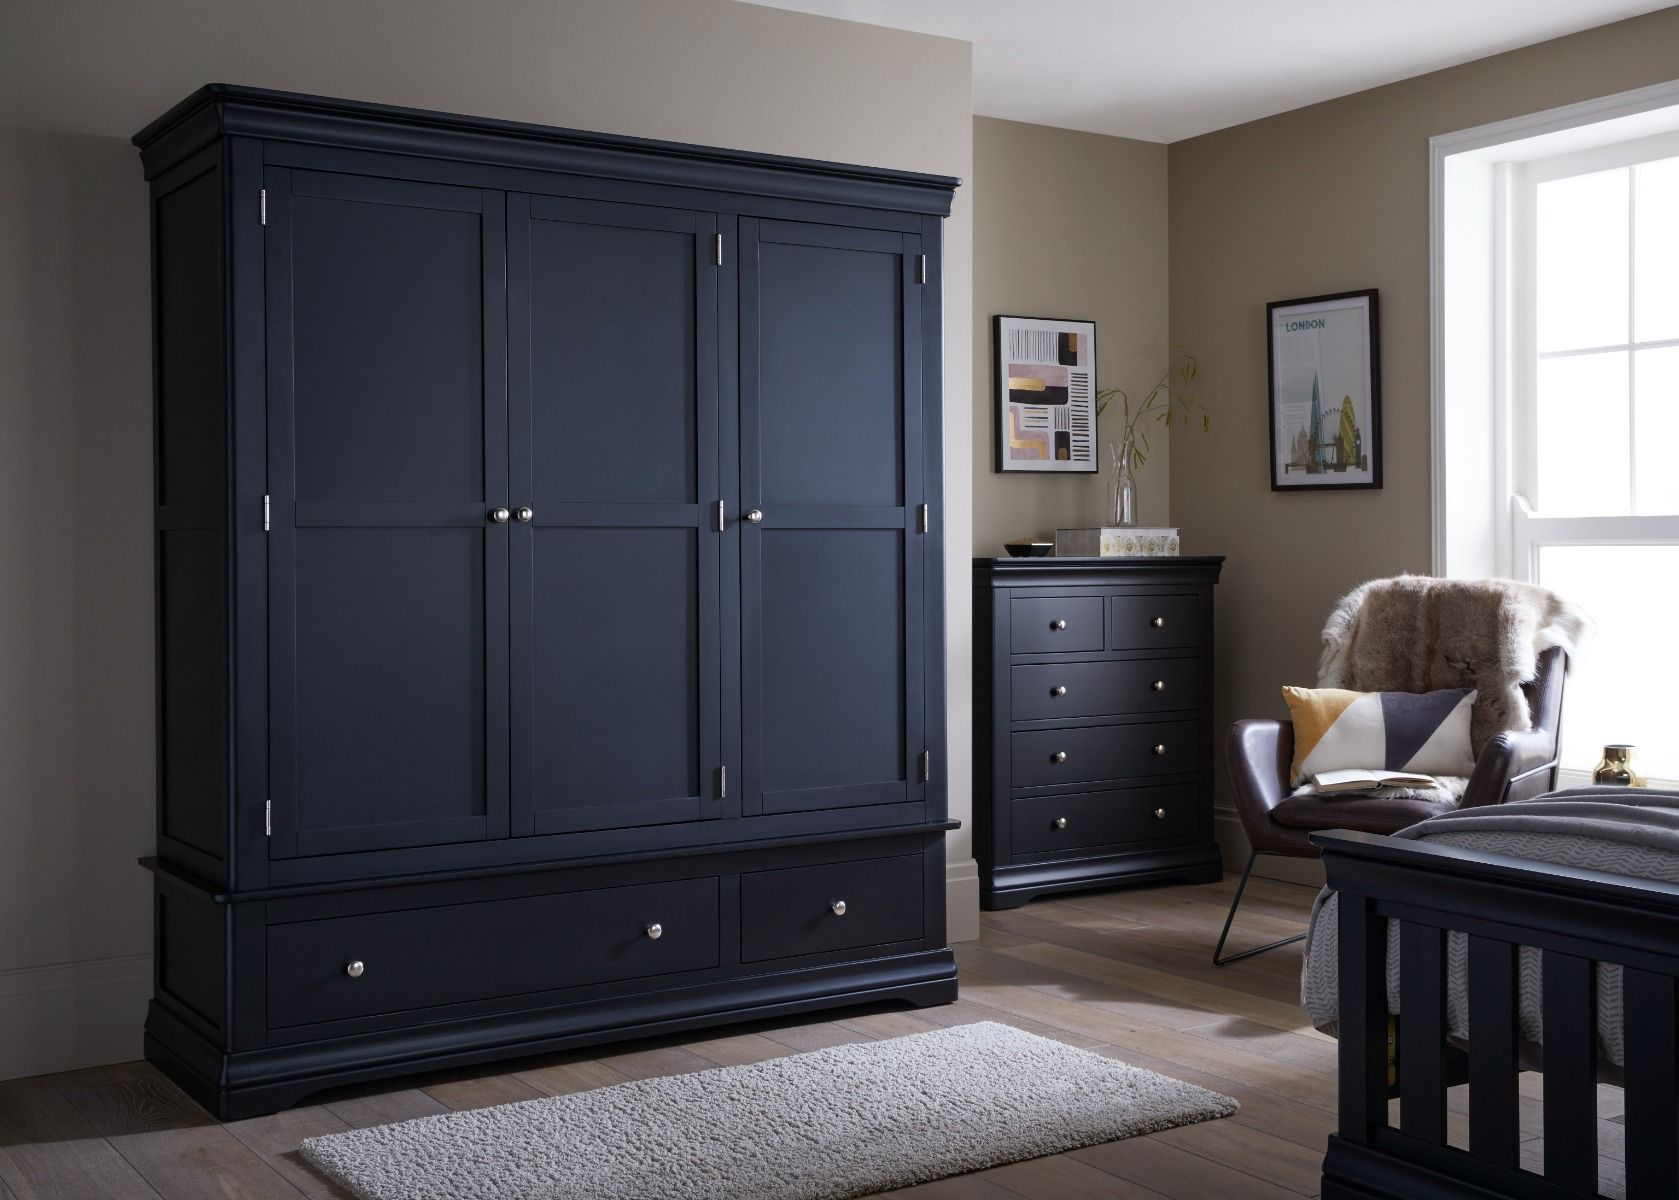 Toulouse Black Painted Large Triple Wardrobe With Drawer Intended For Cheap Solid Wood Wardrobes (View 7 of 11)